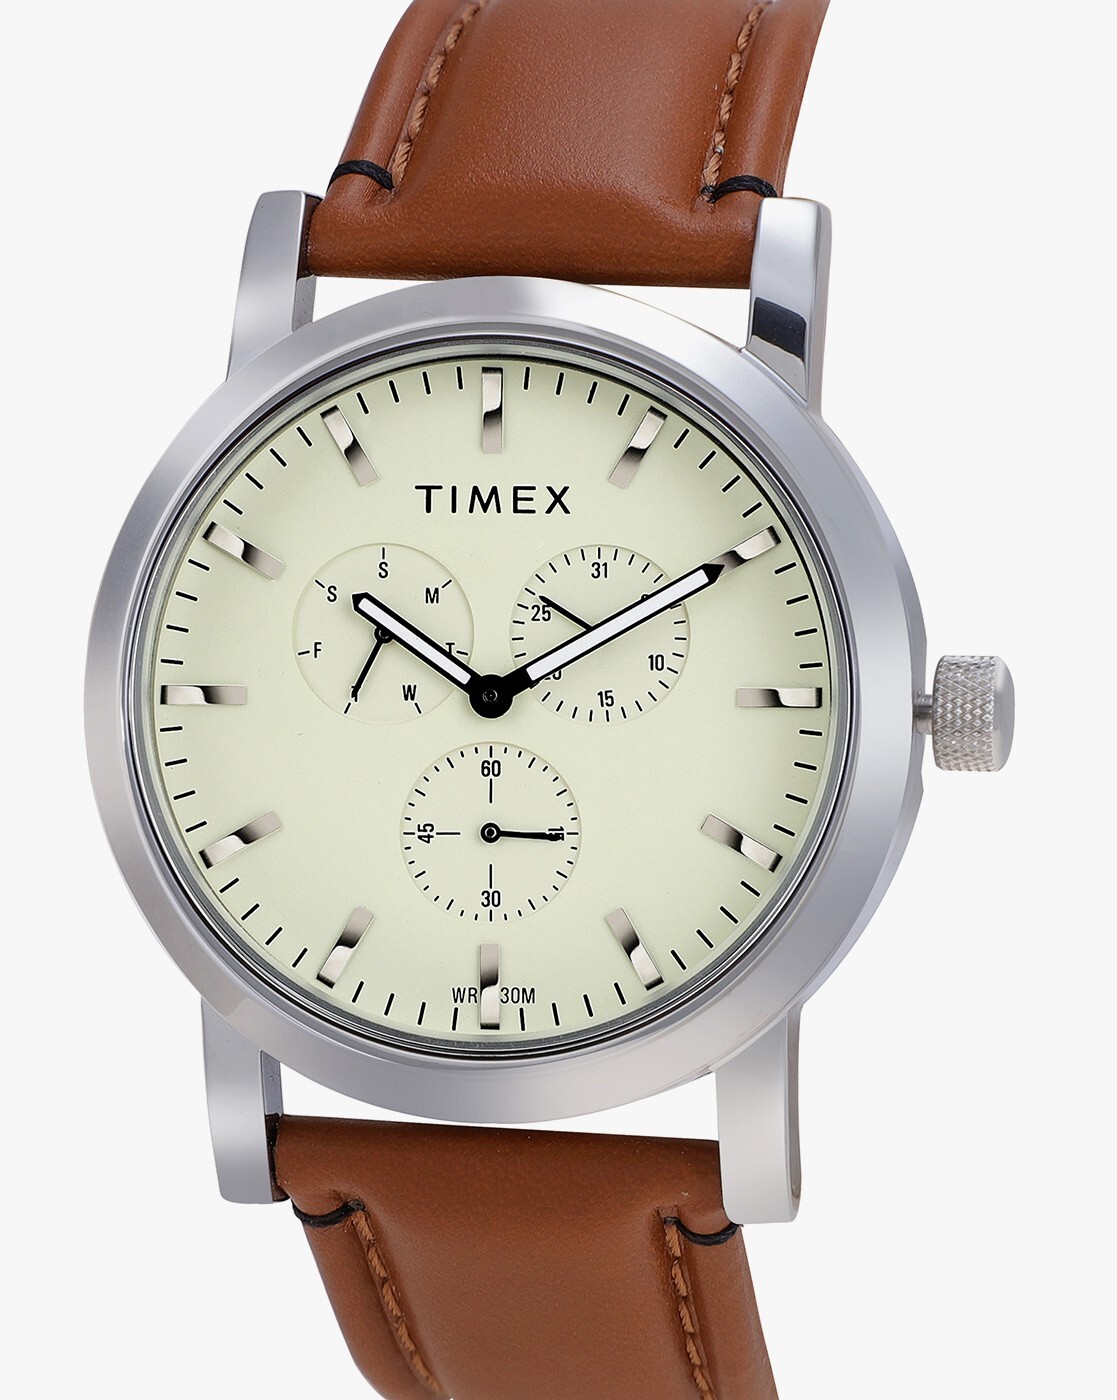 Buy Authentic TIMEX Analog Watches Online In India | Tata CLiQ Luxury-cokhiquangminh.vn